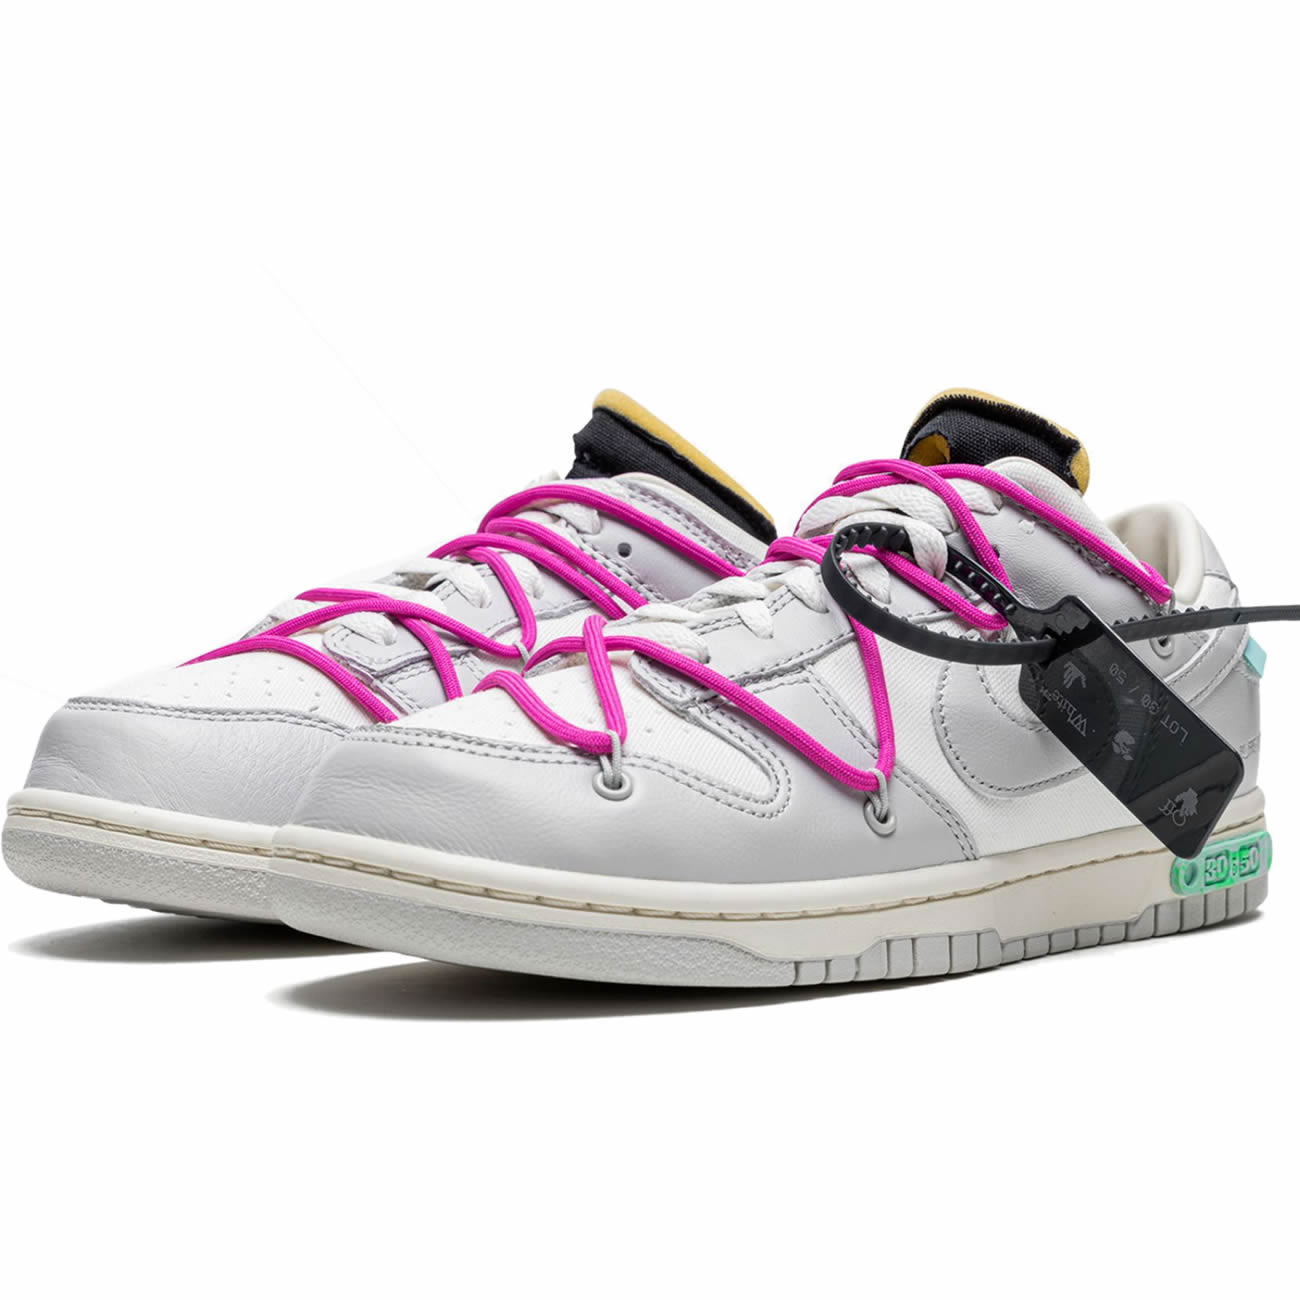 Off White Nike Sb Dunk Low Lot 30 Of 50 Sail Neutral Grey Pink Dm1602 122 (2) - newkick.org